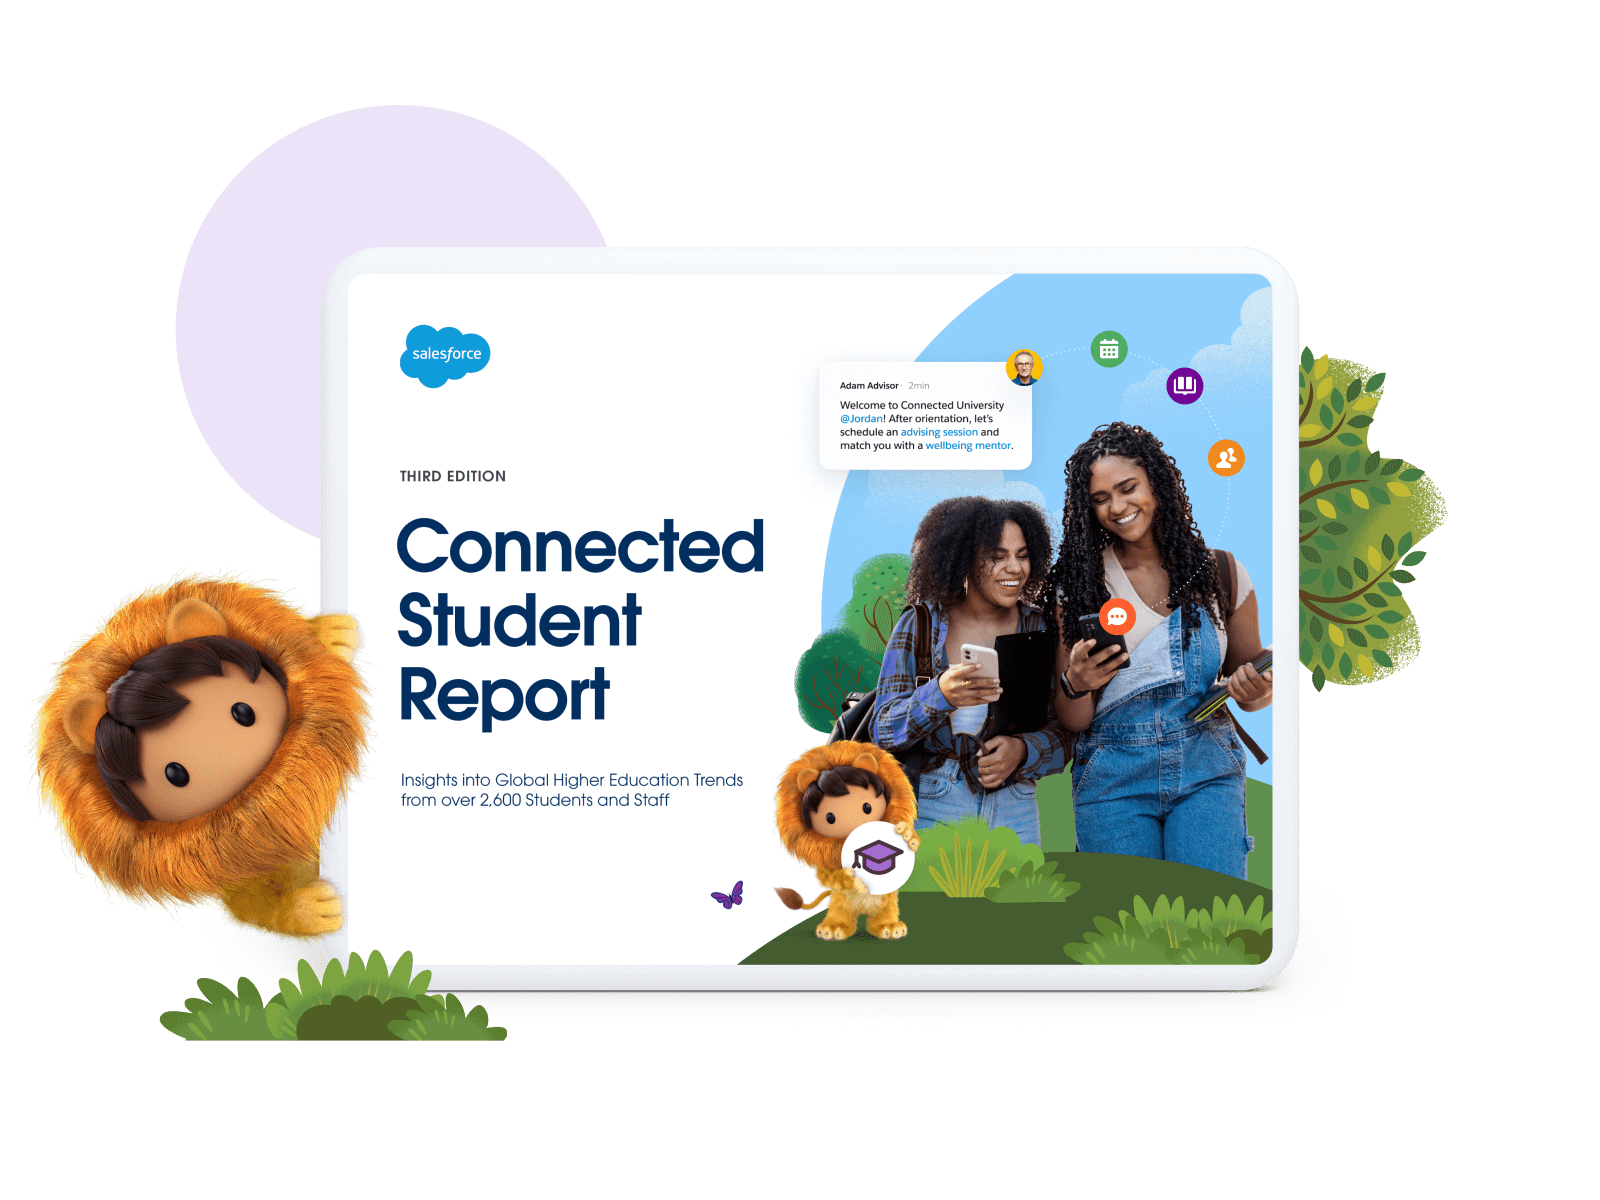 Connected Student Report third edition